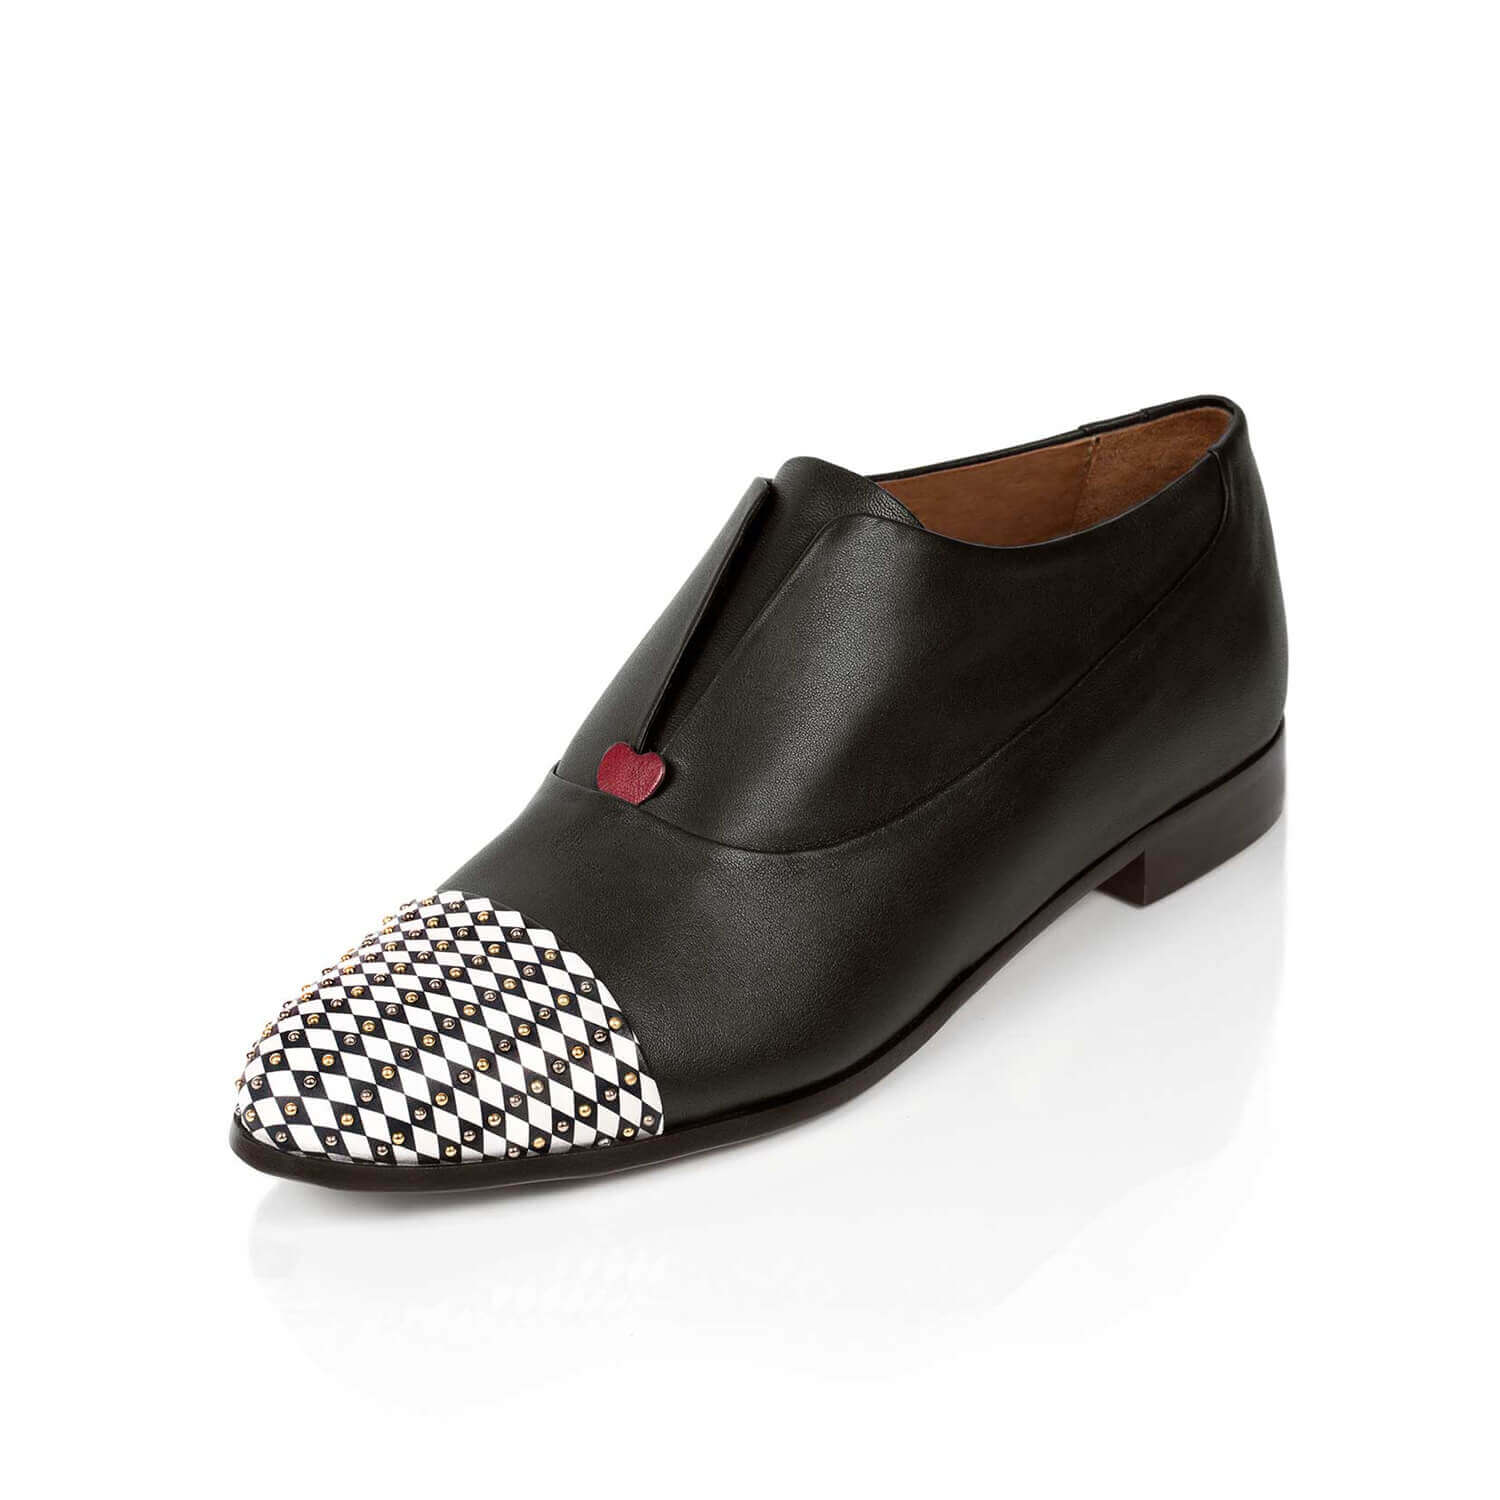 Gaia - Oxford Shoe For Women In Black - Mastra Ma' Luxury Shoes